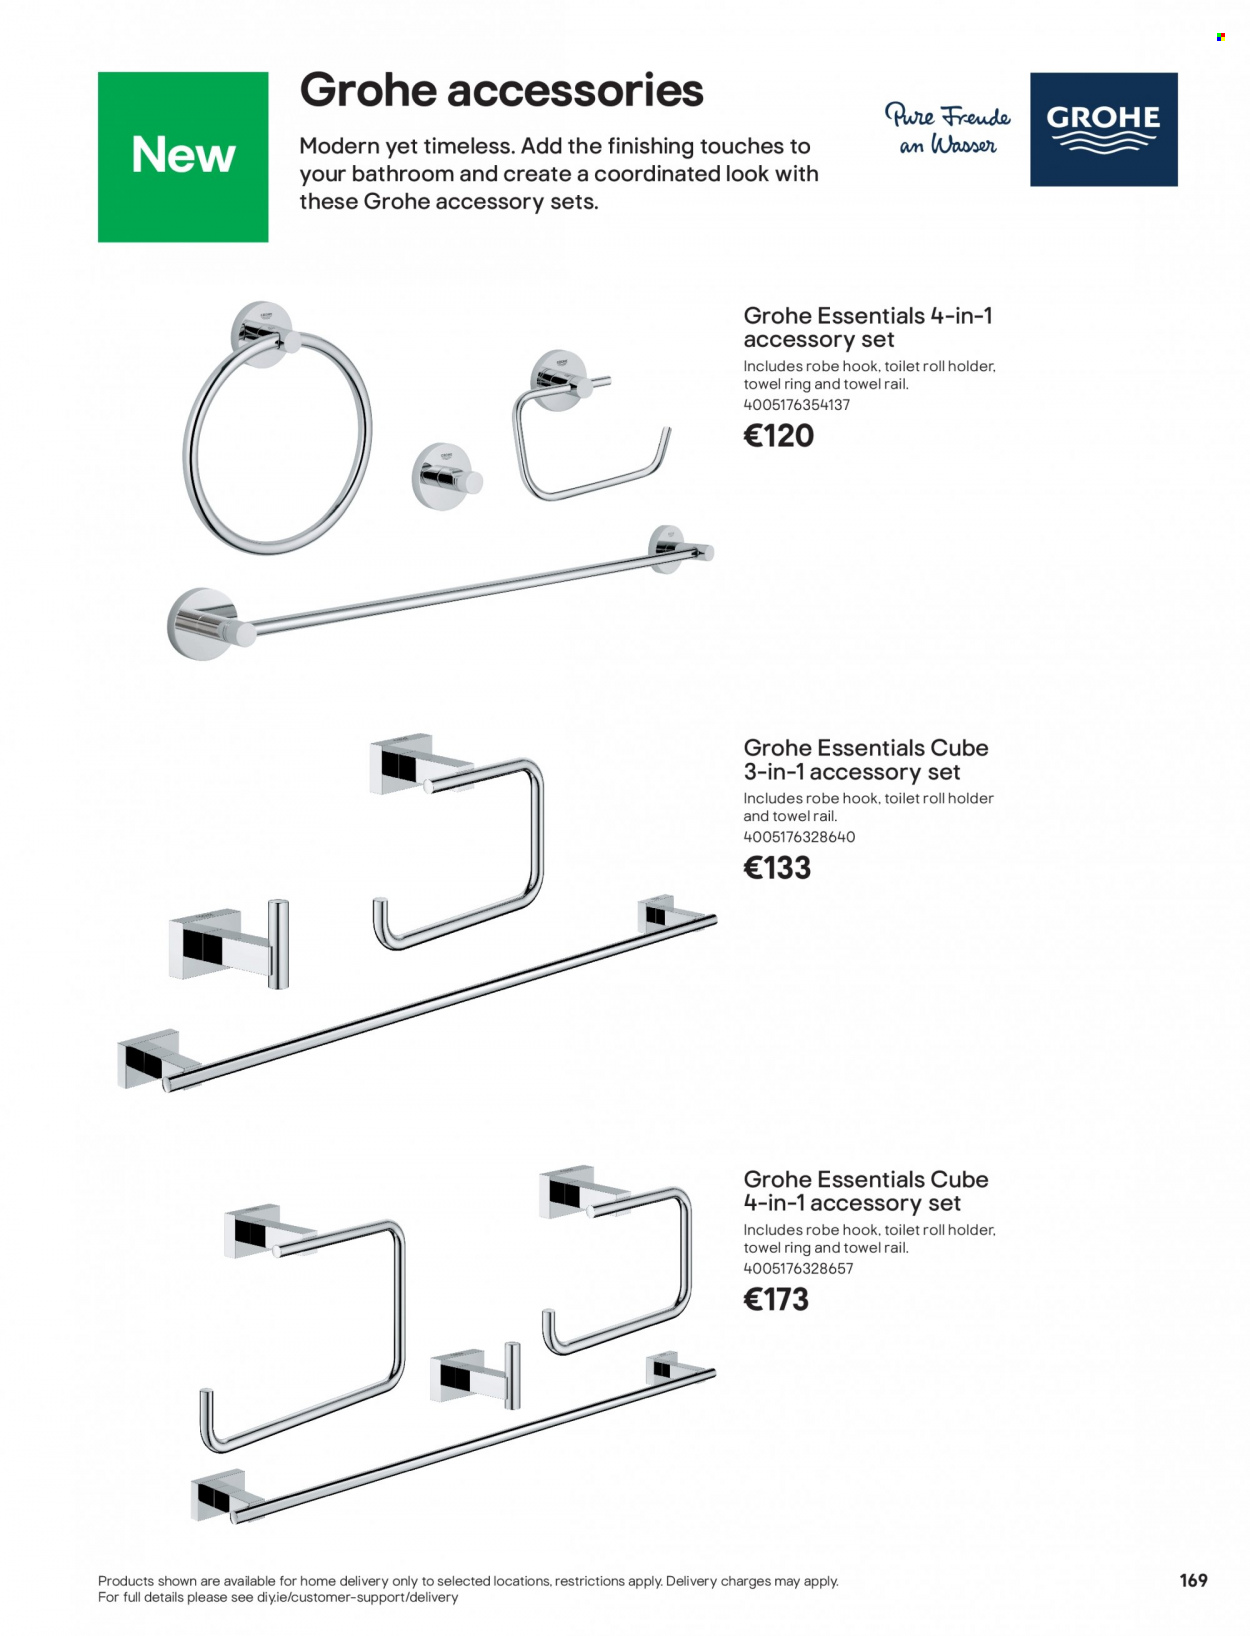 thumbnail - B&Q offer  - Sales products - Grohe, toilet roll holder, towel hanger, holder. Page 169.